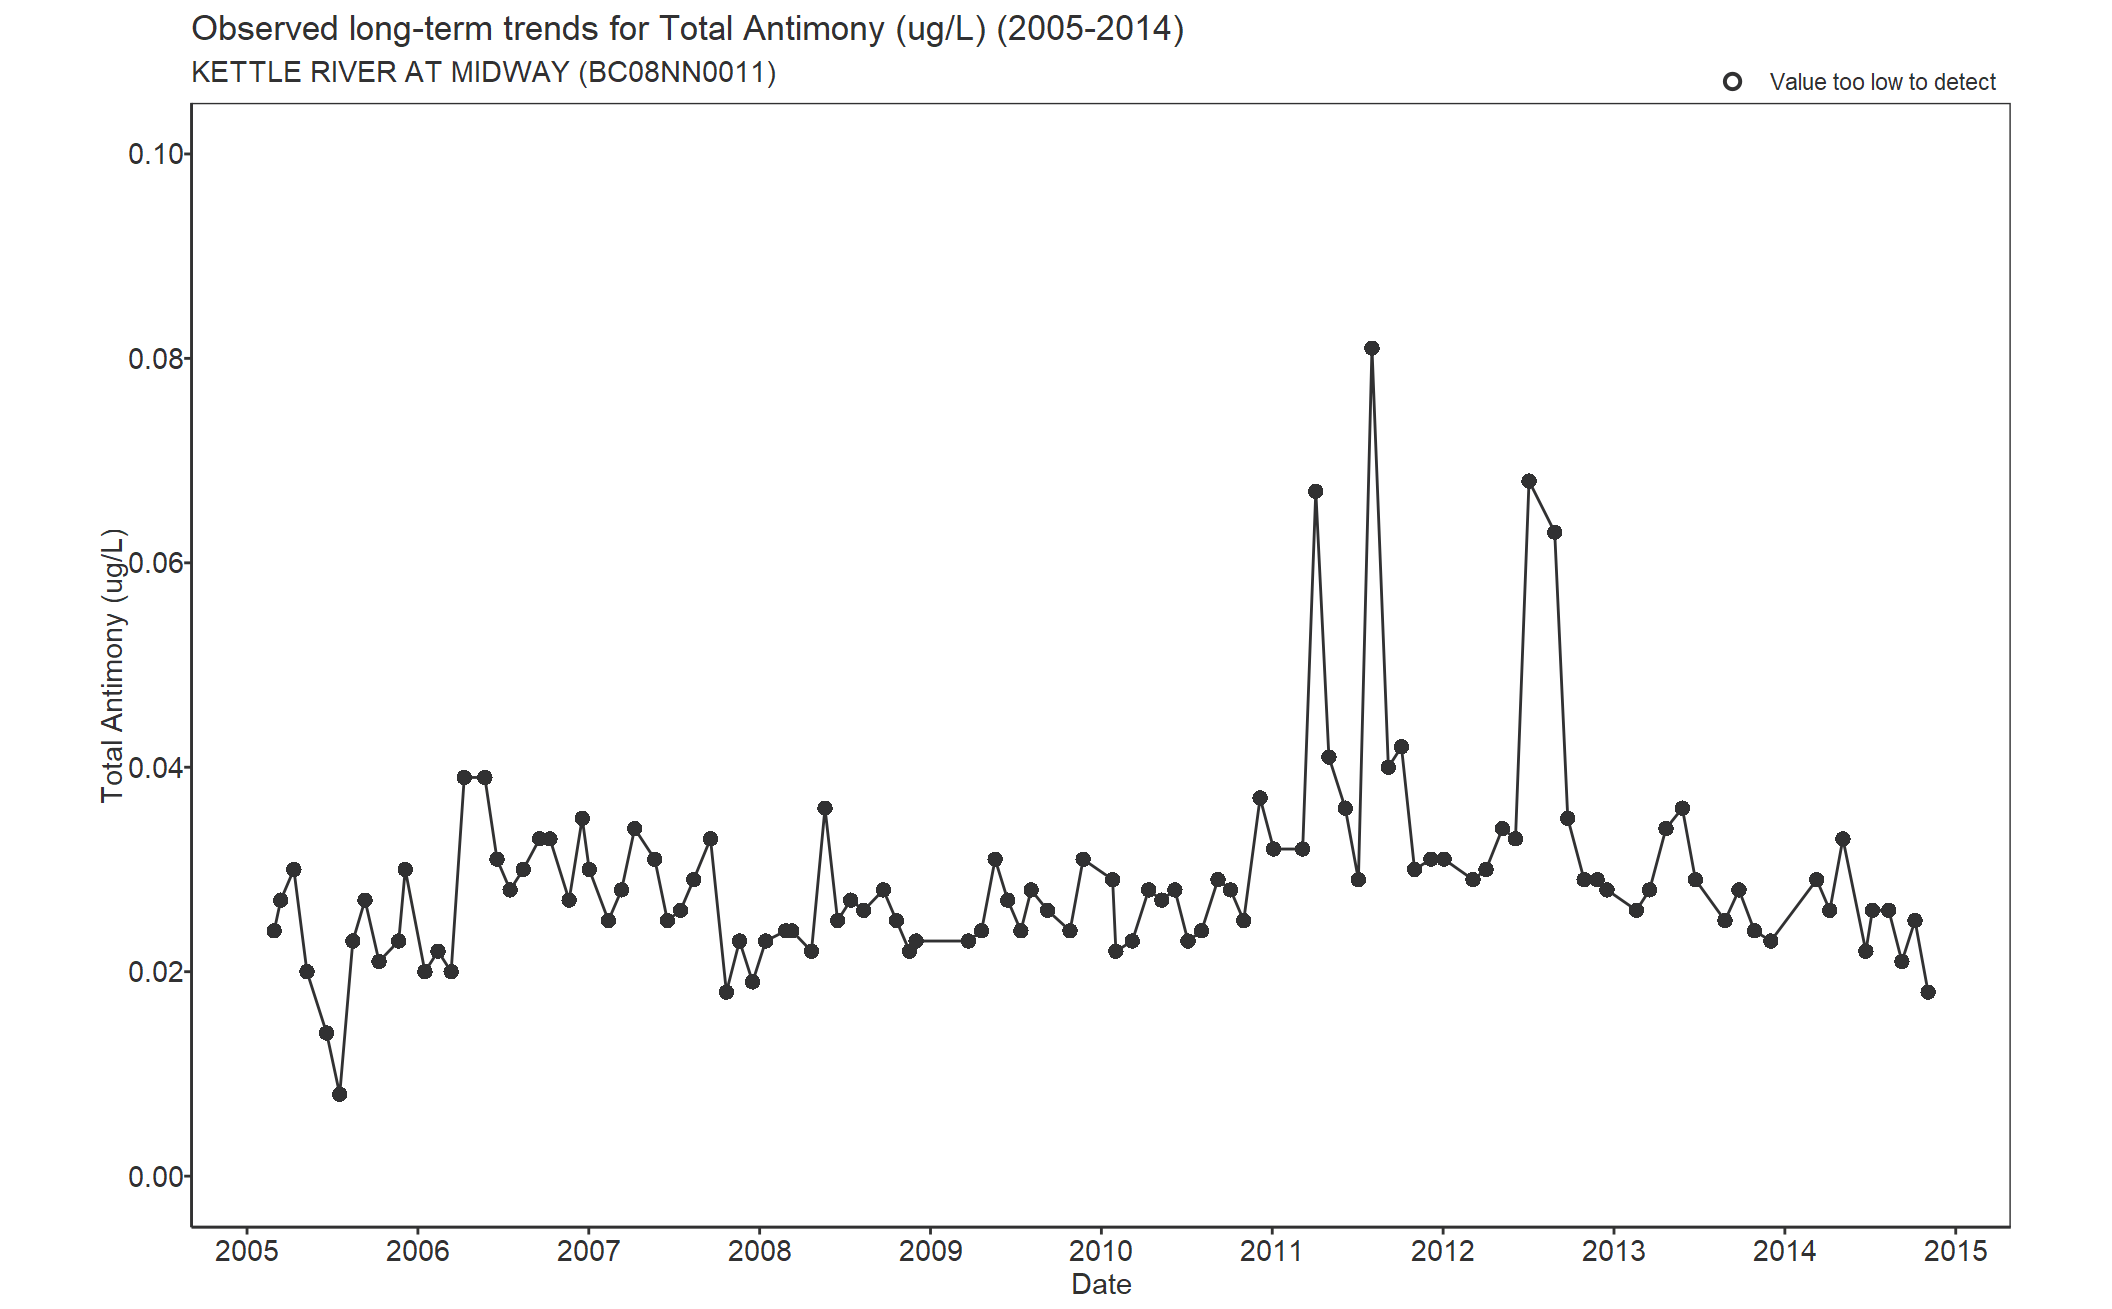 Observed long-term trends for Antimony Total (2005-2014)